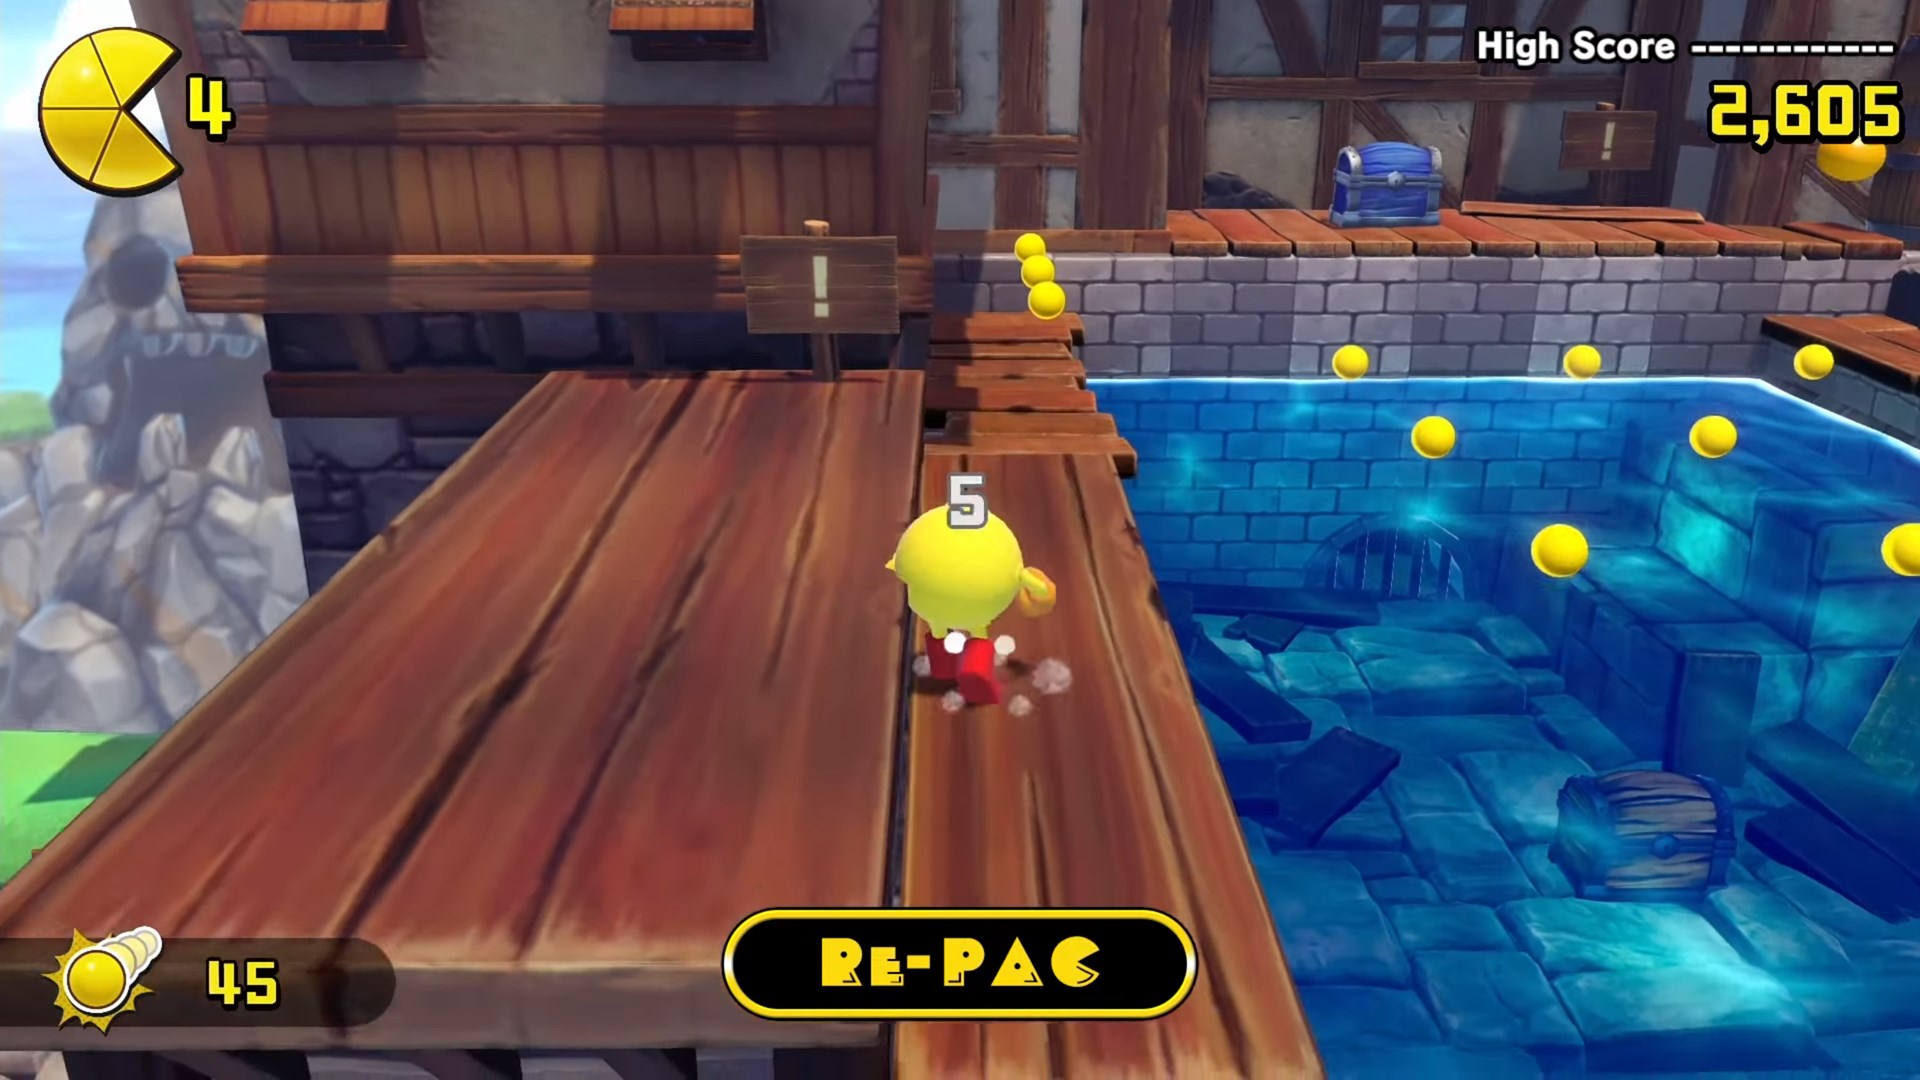 Wario64 on X: there is also additional paid DLC for PAC-MAN 99